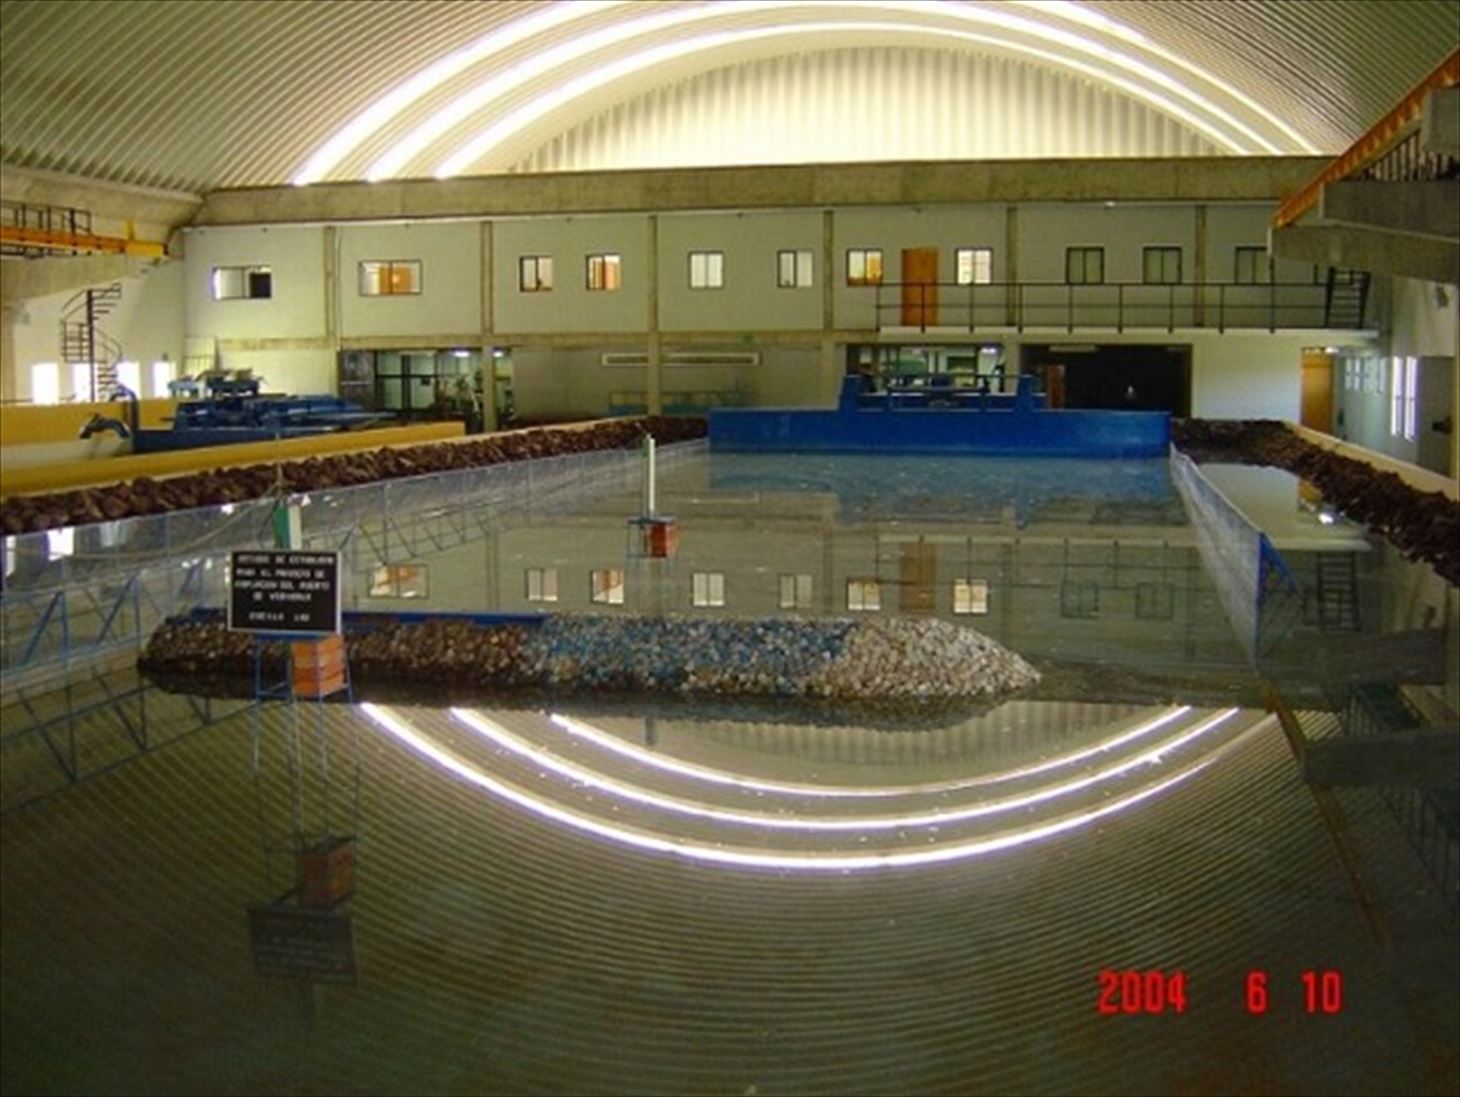 Photo 9: Experimental wave tank of the MTI (June 2004) (The wave generators in the front were provided from Japan)